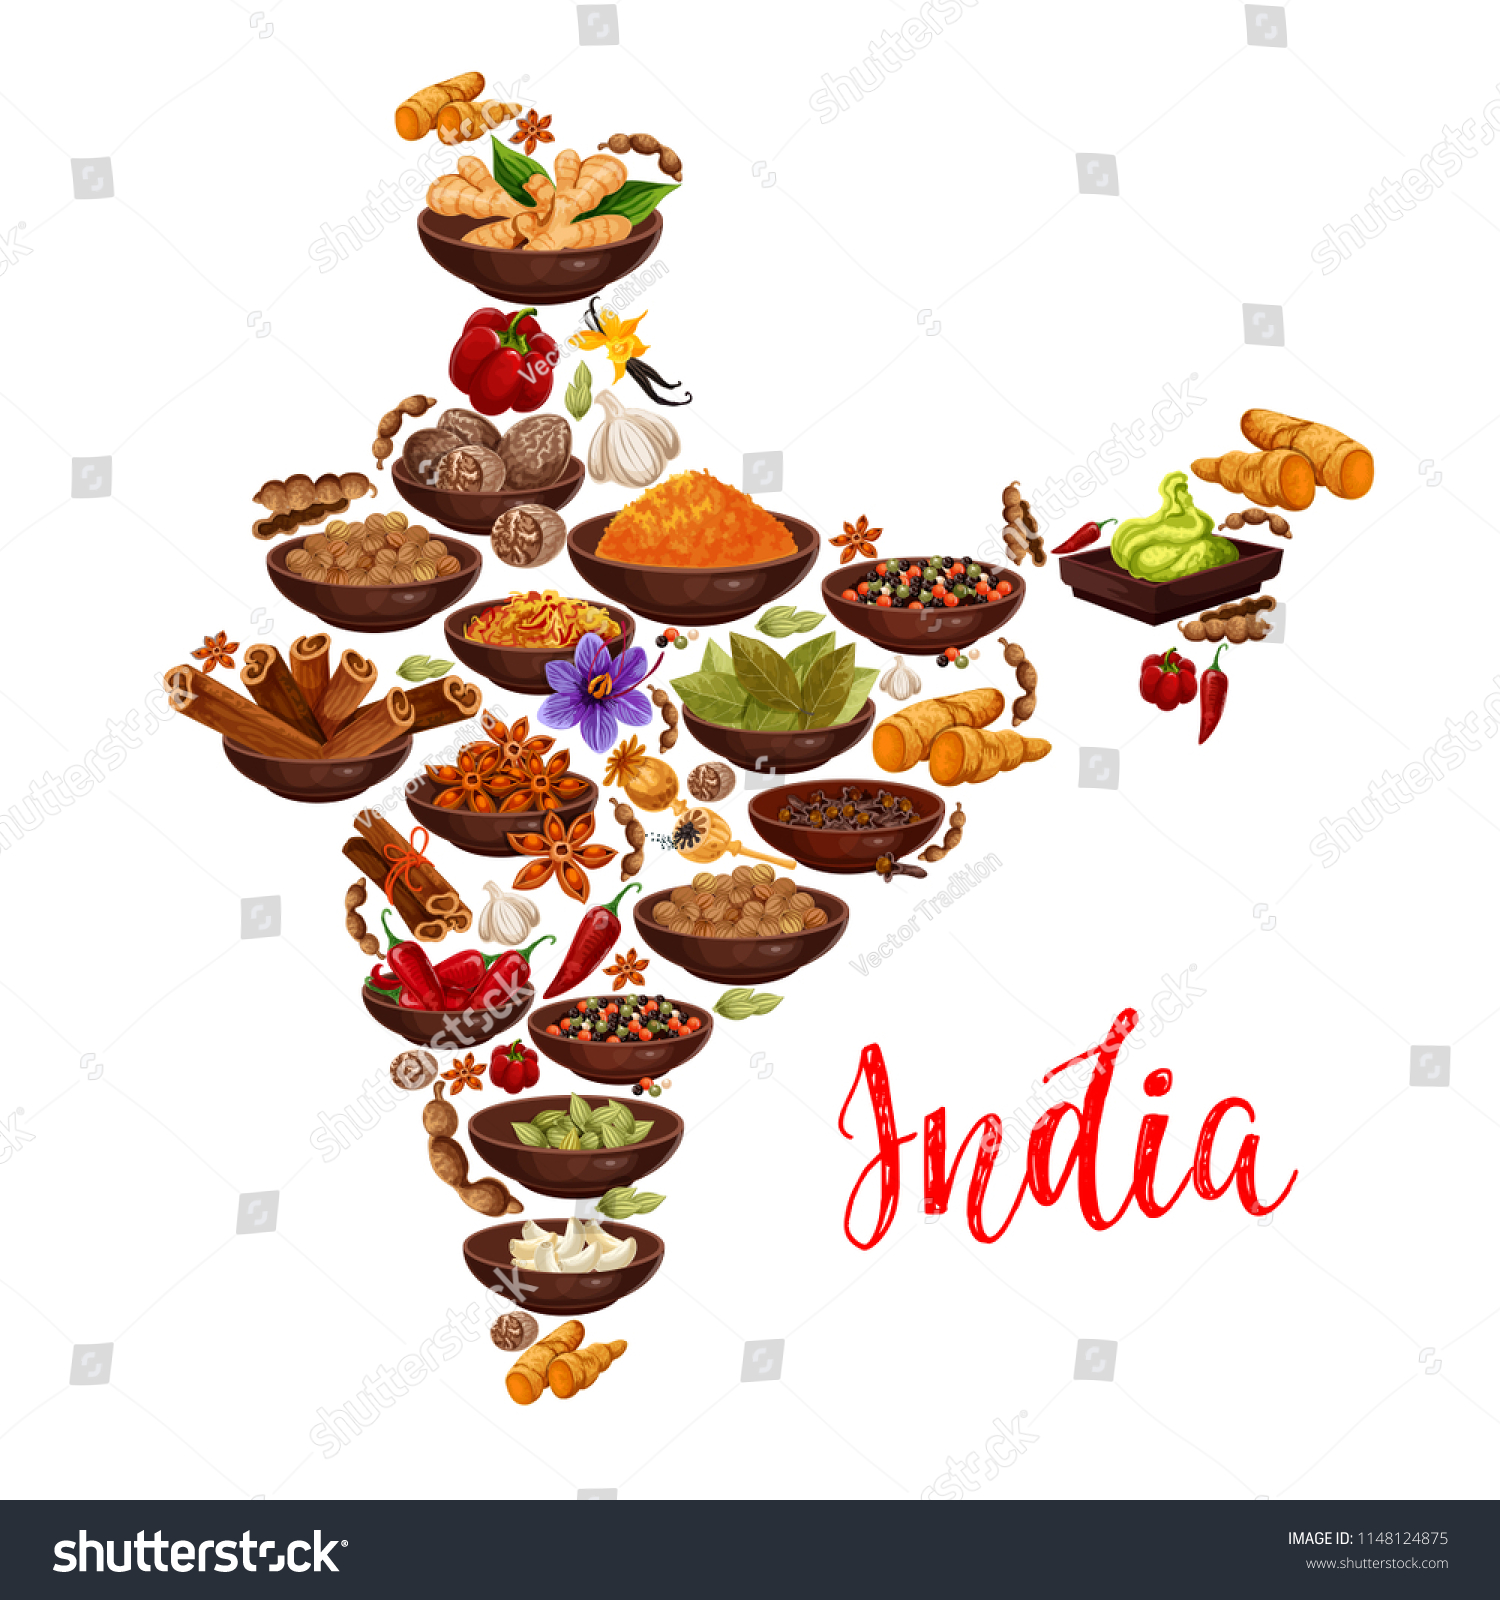 Indian cuisine spices in India map Vector design of curry, ginger and anise with masala seasonings of chili pepper and turmeric curcuma, saffron or vanilla and nutmeg #1148124875